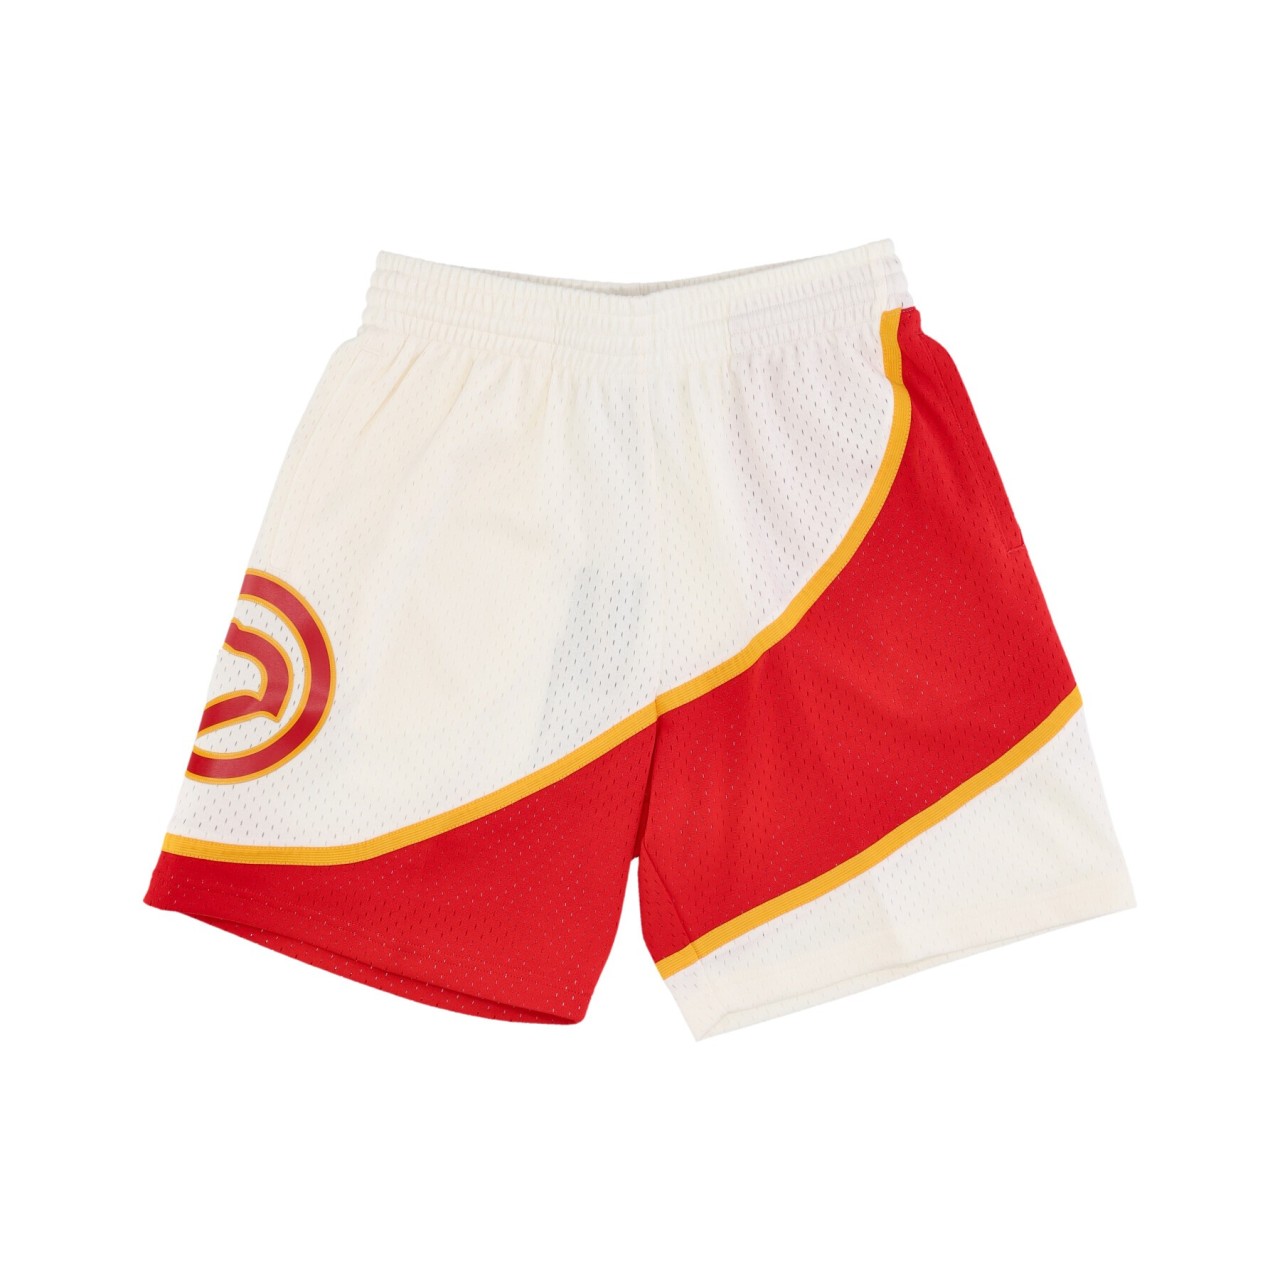 MITCHELL & NESS NBA OFF WHITE TEAM COLOR SWINGMAN SHORTS HARDWOOD CLASSICS 1986 ATLHAW SMSH5054-AHA86PPPOFWH